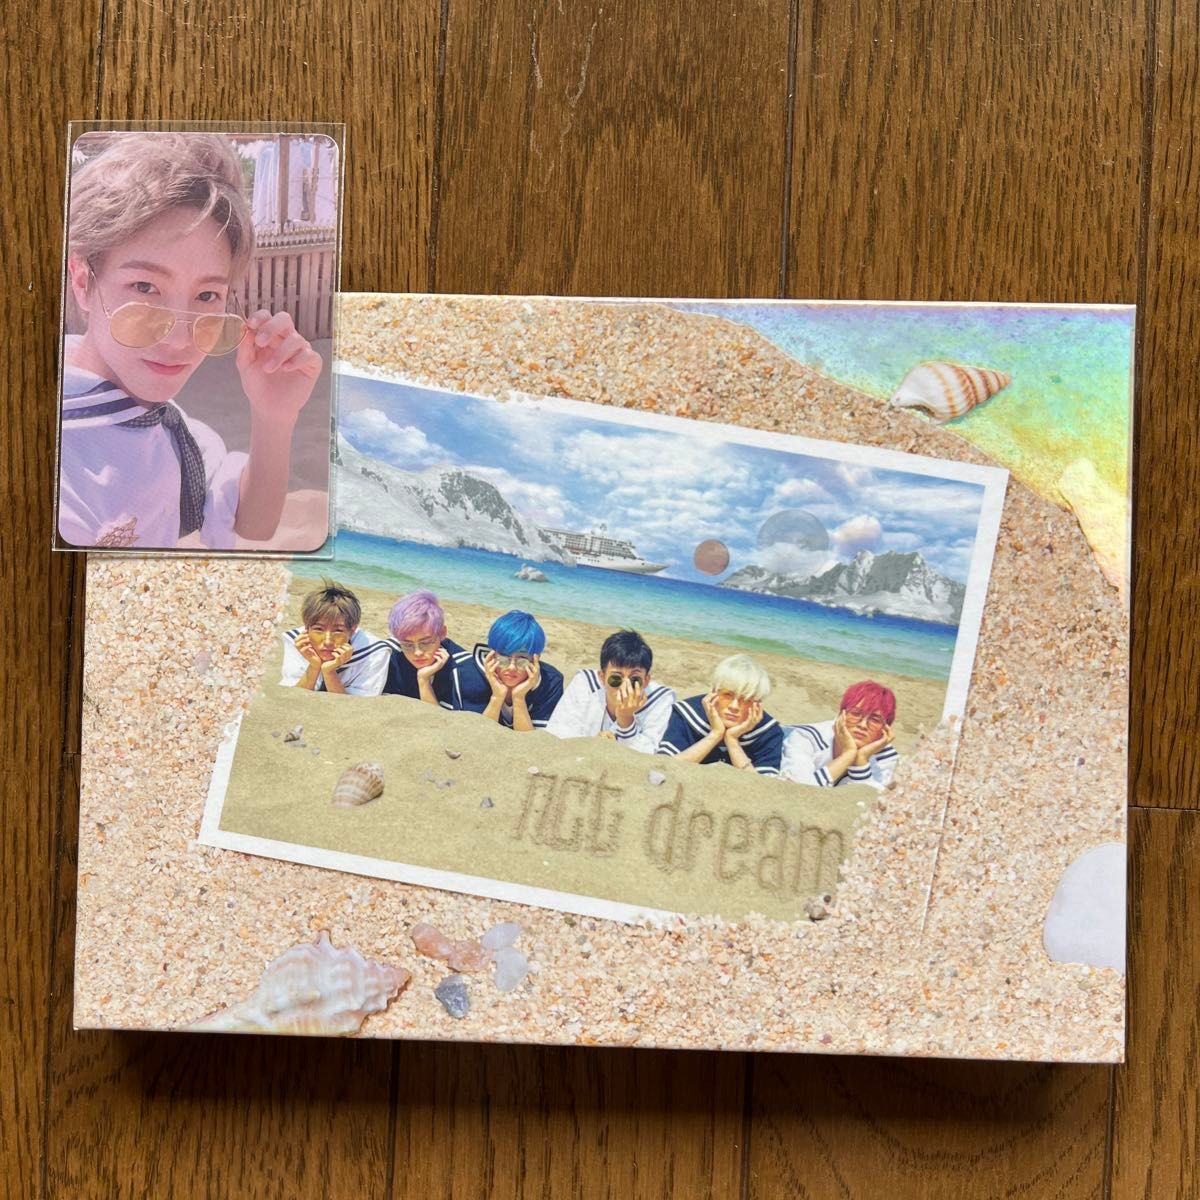 we young  nct dream  ロンジュン